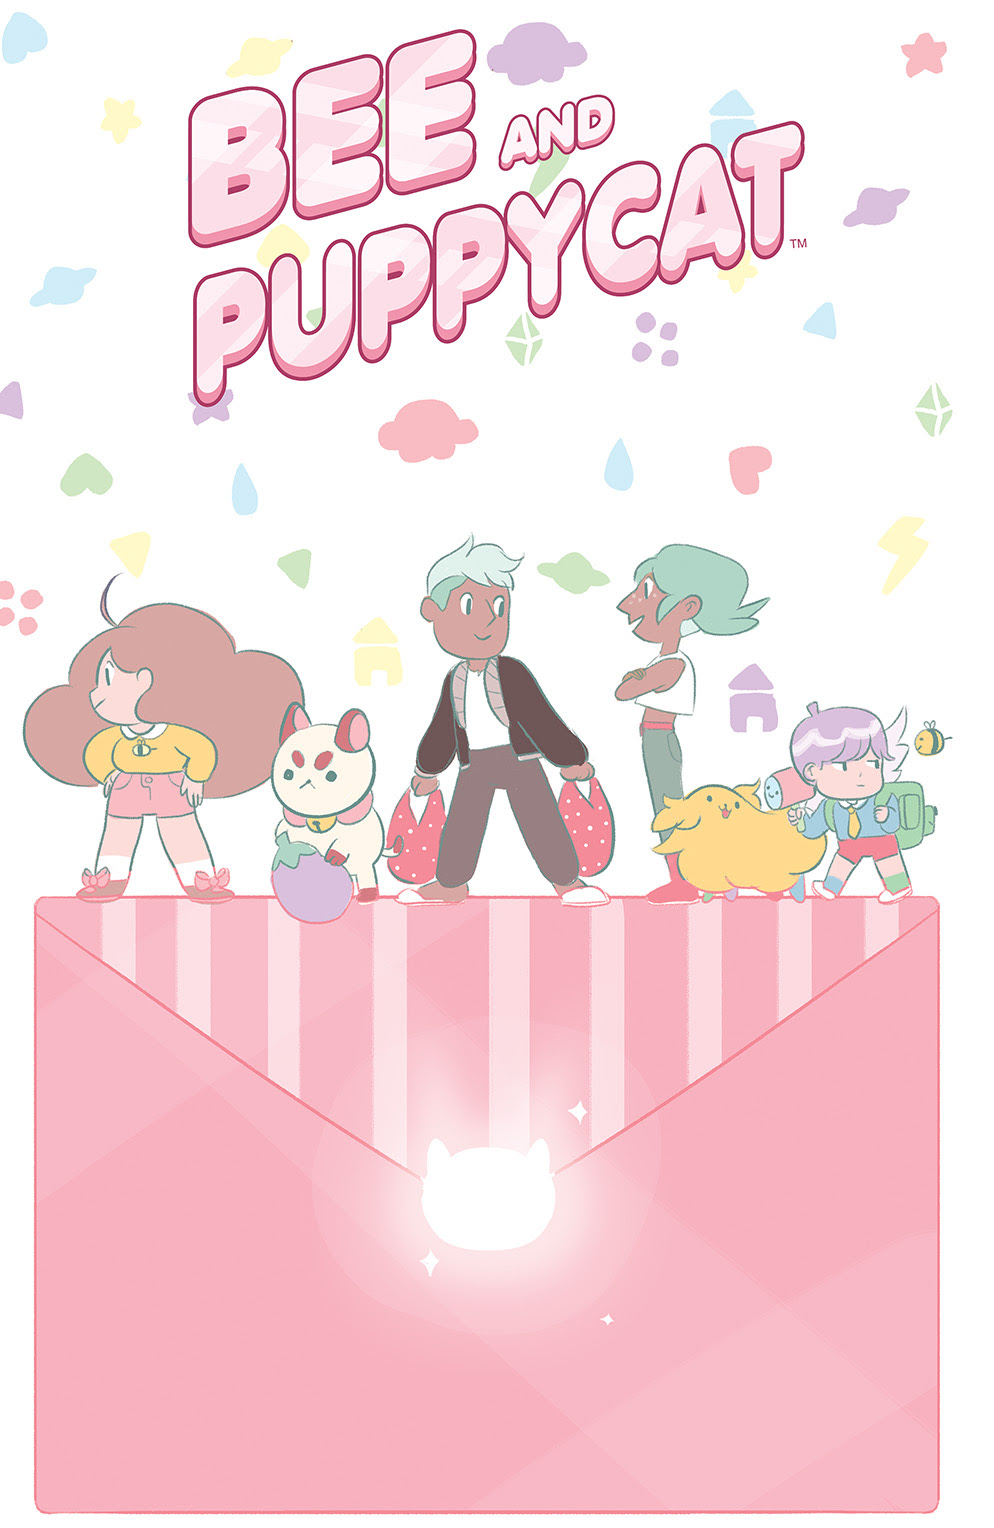 BEE AND PUPPYCAT #4 Cover A by Natasha Allegri